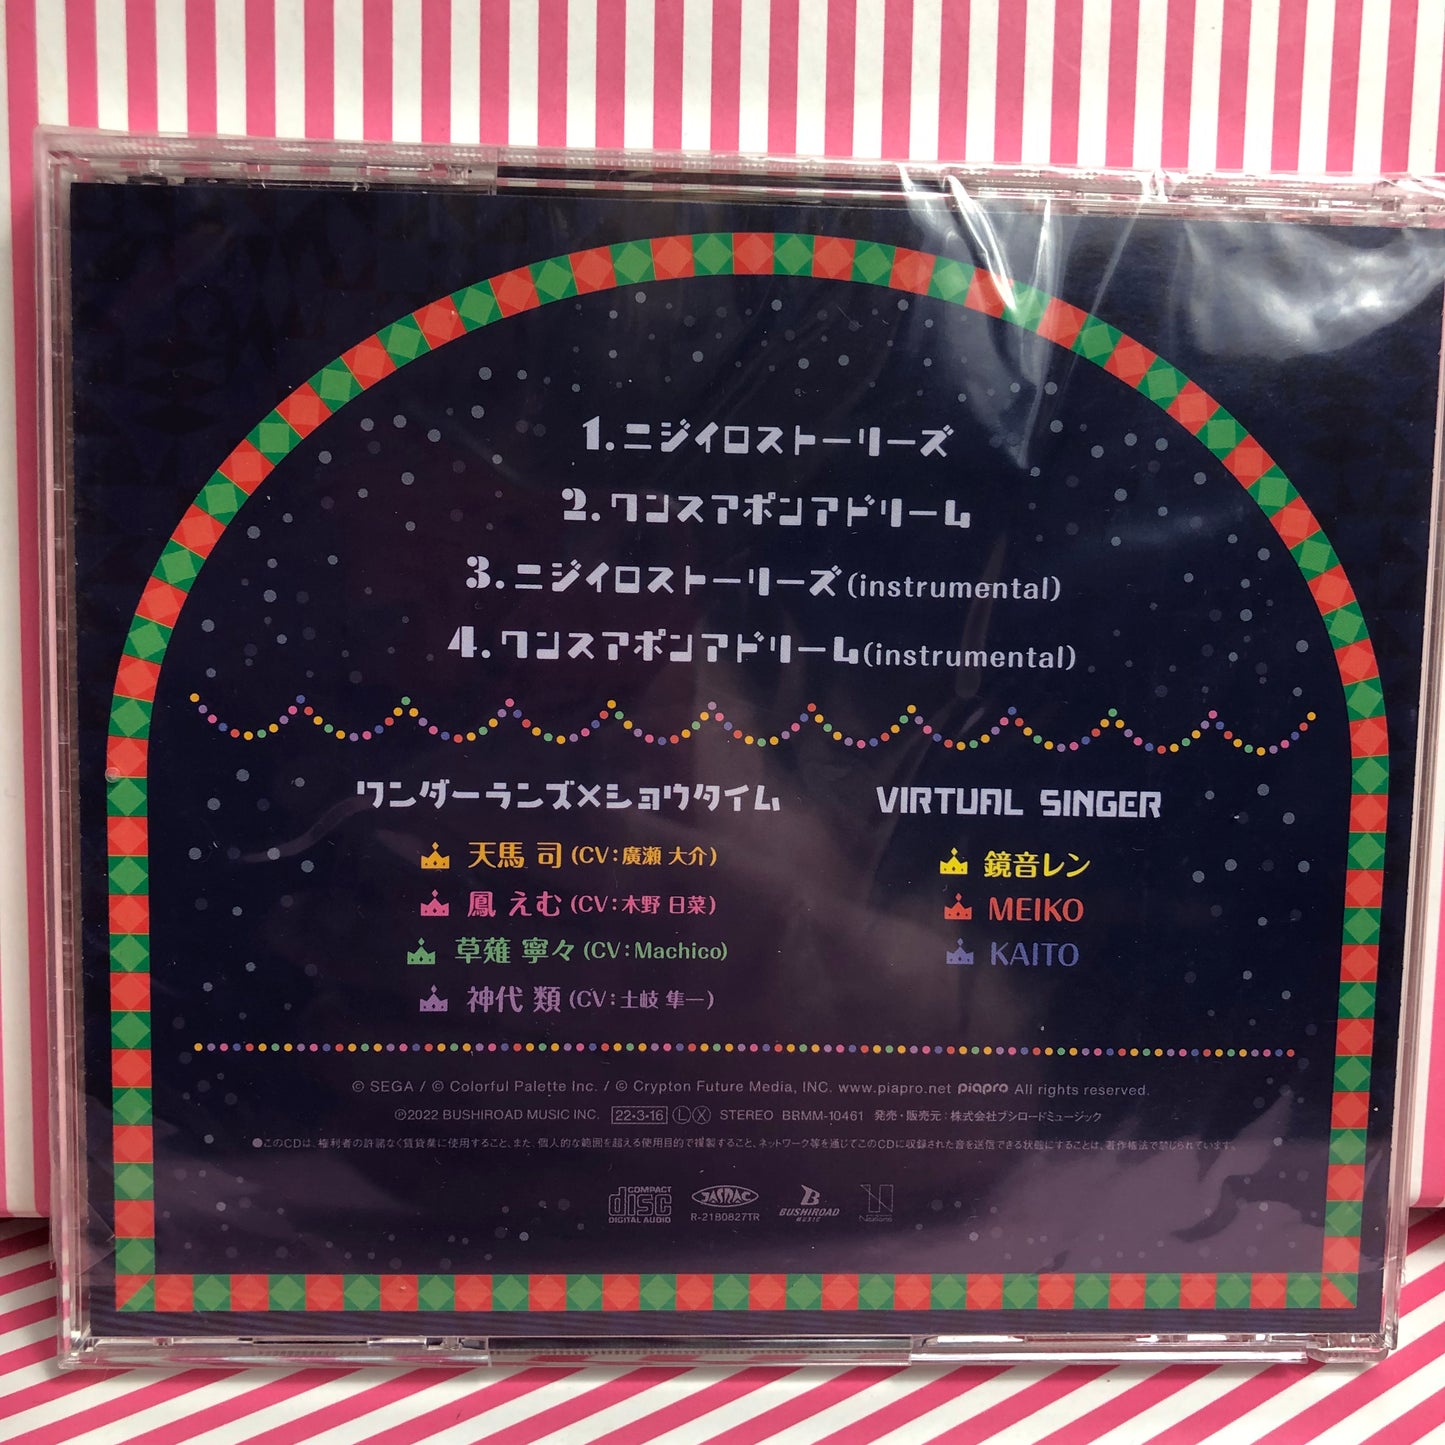 Wonderlands x Showtime - Once Upon a Dream / Niijiro Stories Single CD Project Sekai Colorful Stage! ft. Hatsune Miku